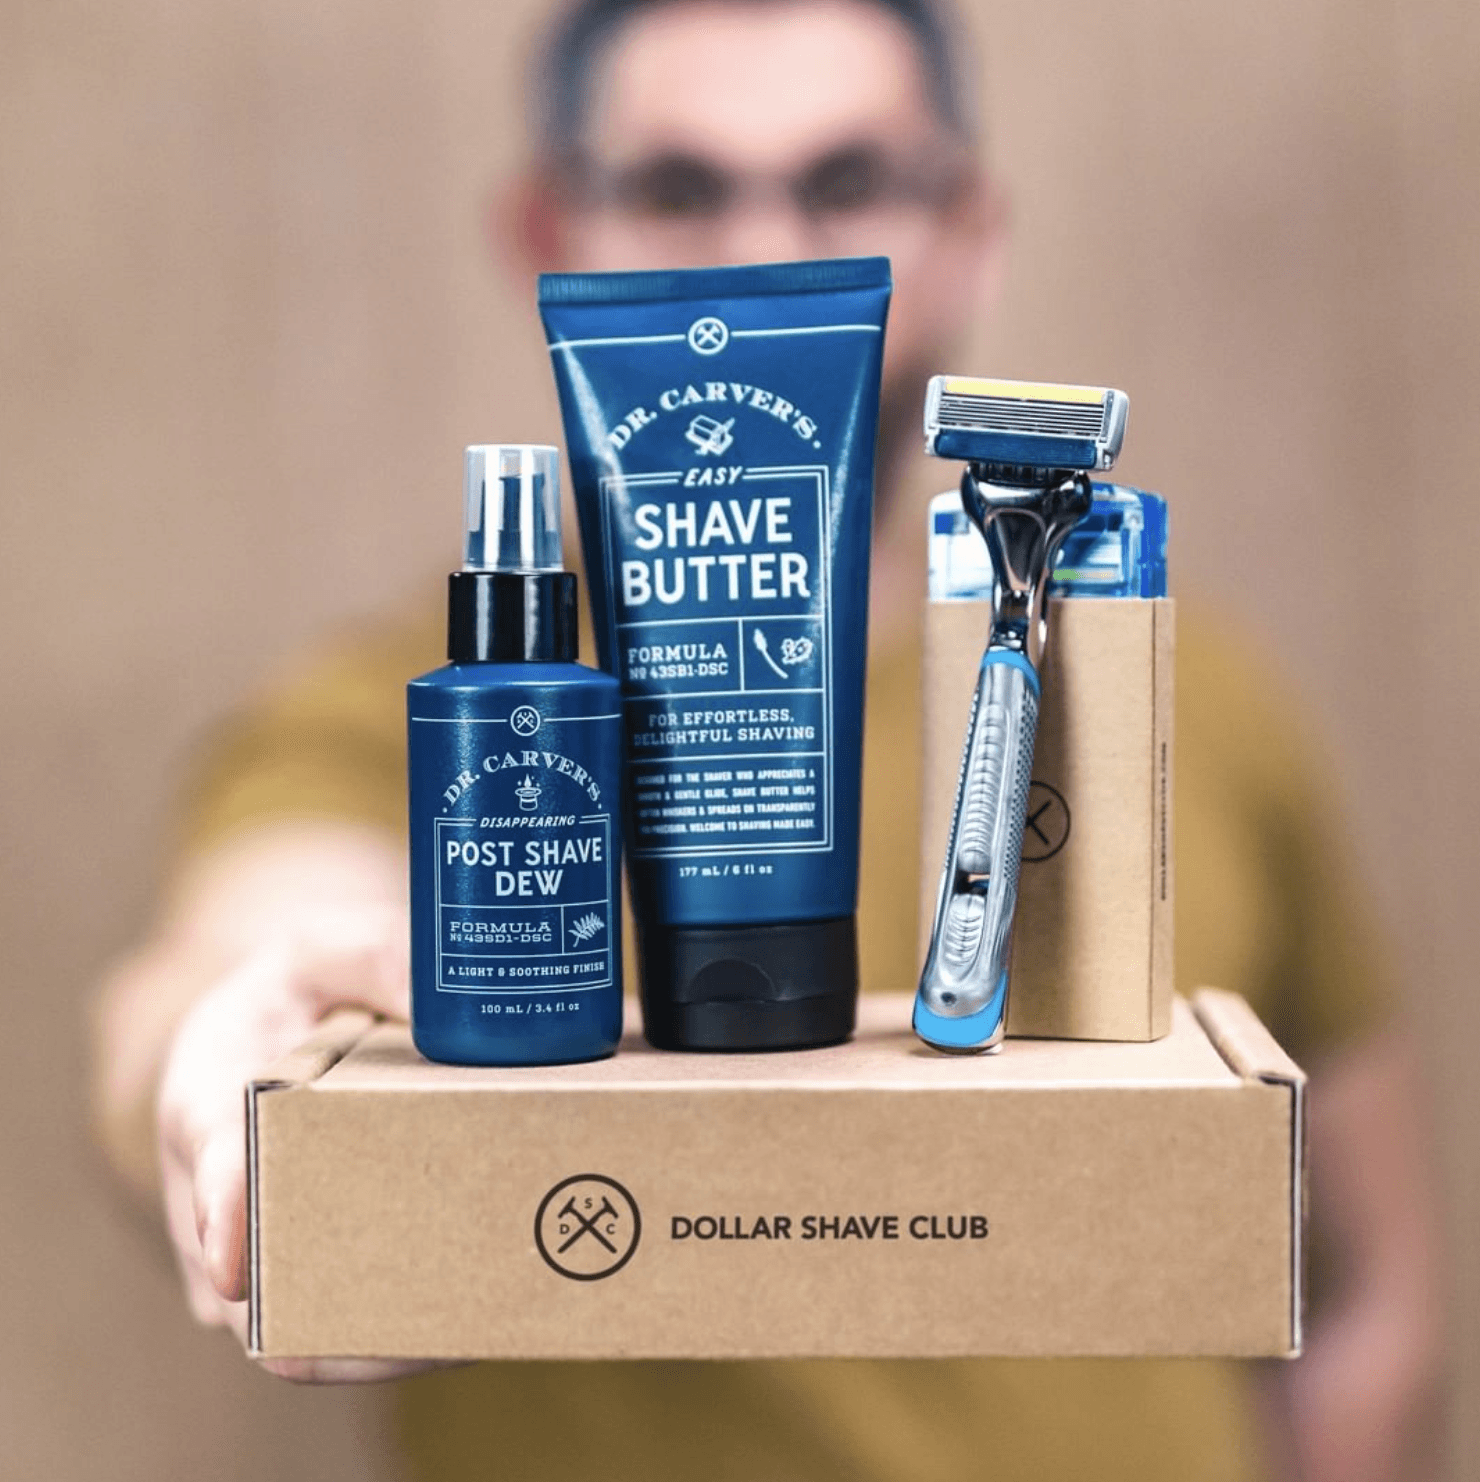 dollar shave club idea for groomsmen gifts